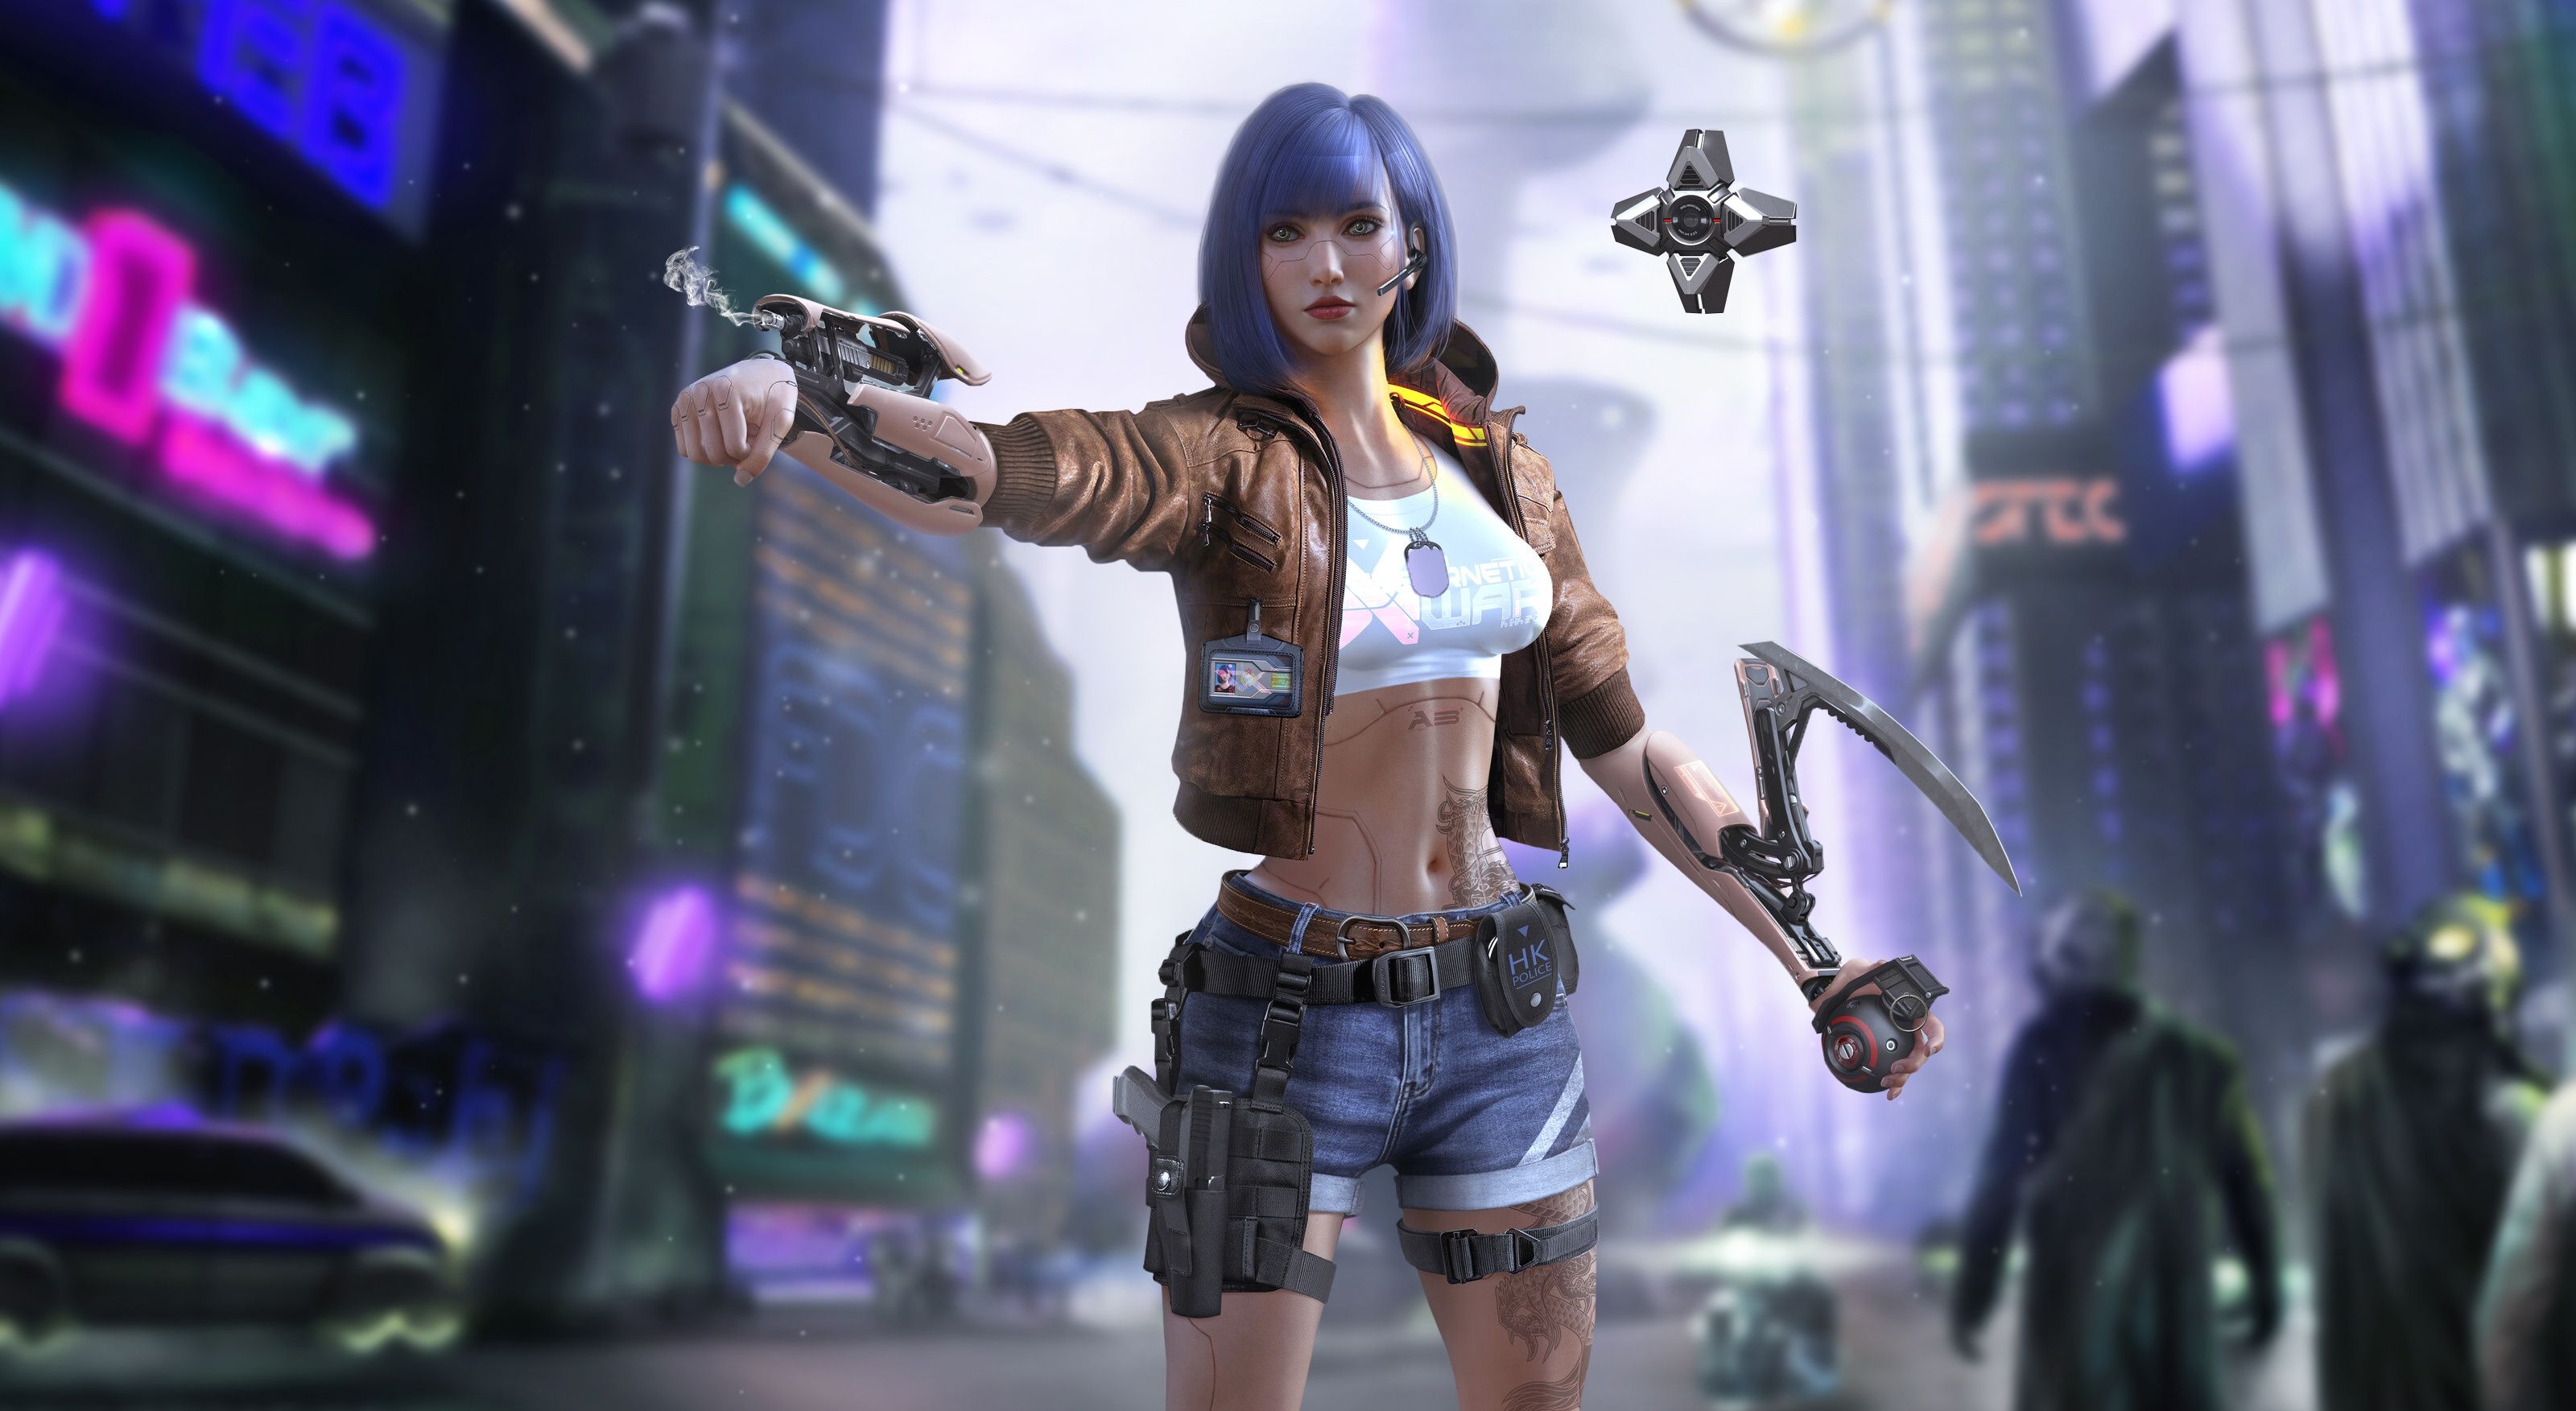 Cyborg Girl Cyberpunk 1440P Resolution HD 4k Wallpaper, Image, Background, Photo and Picture